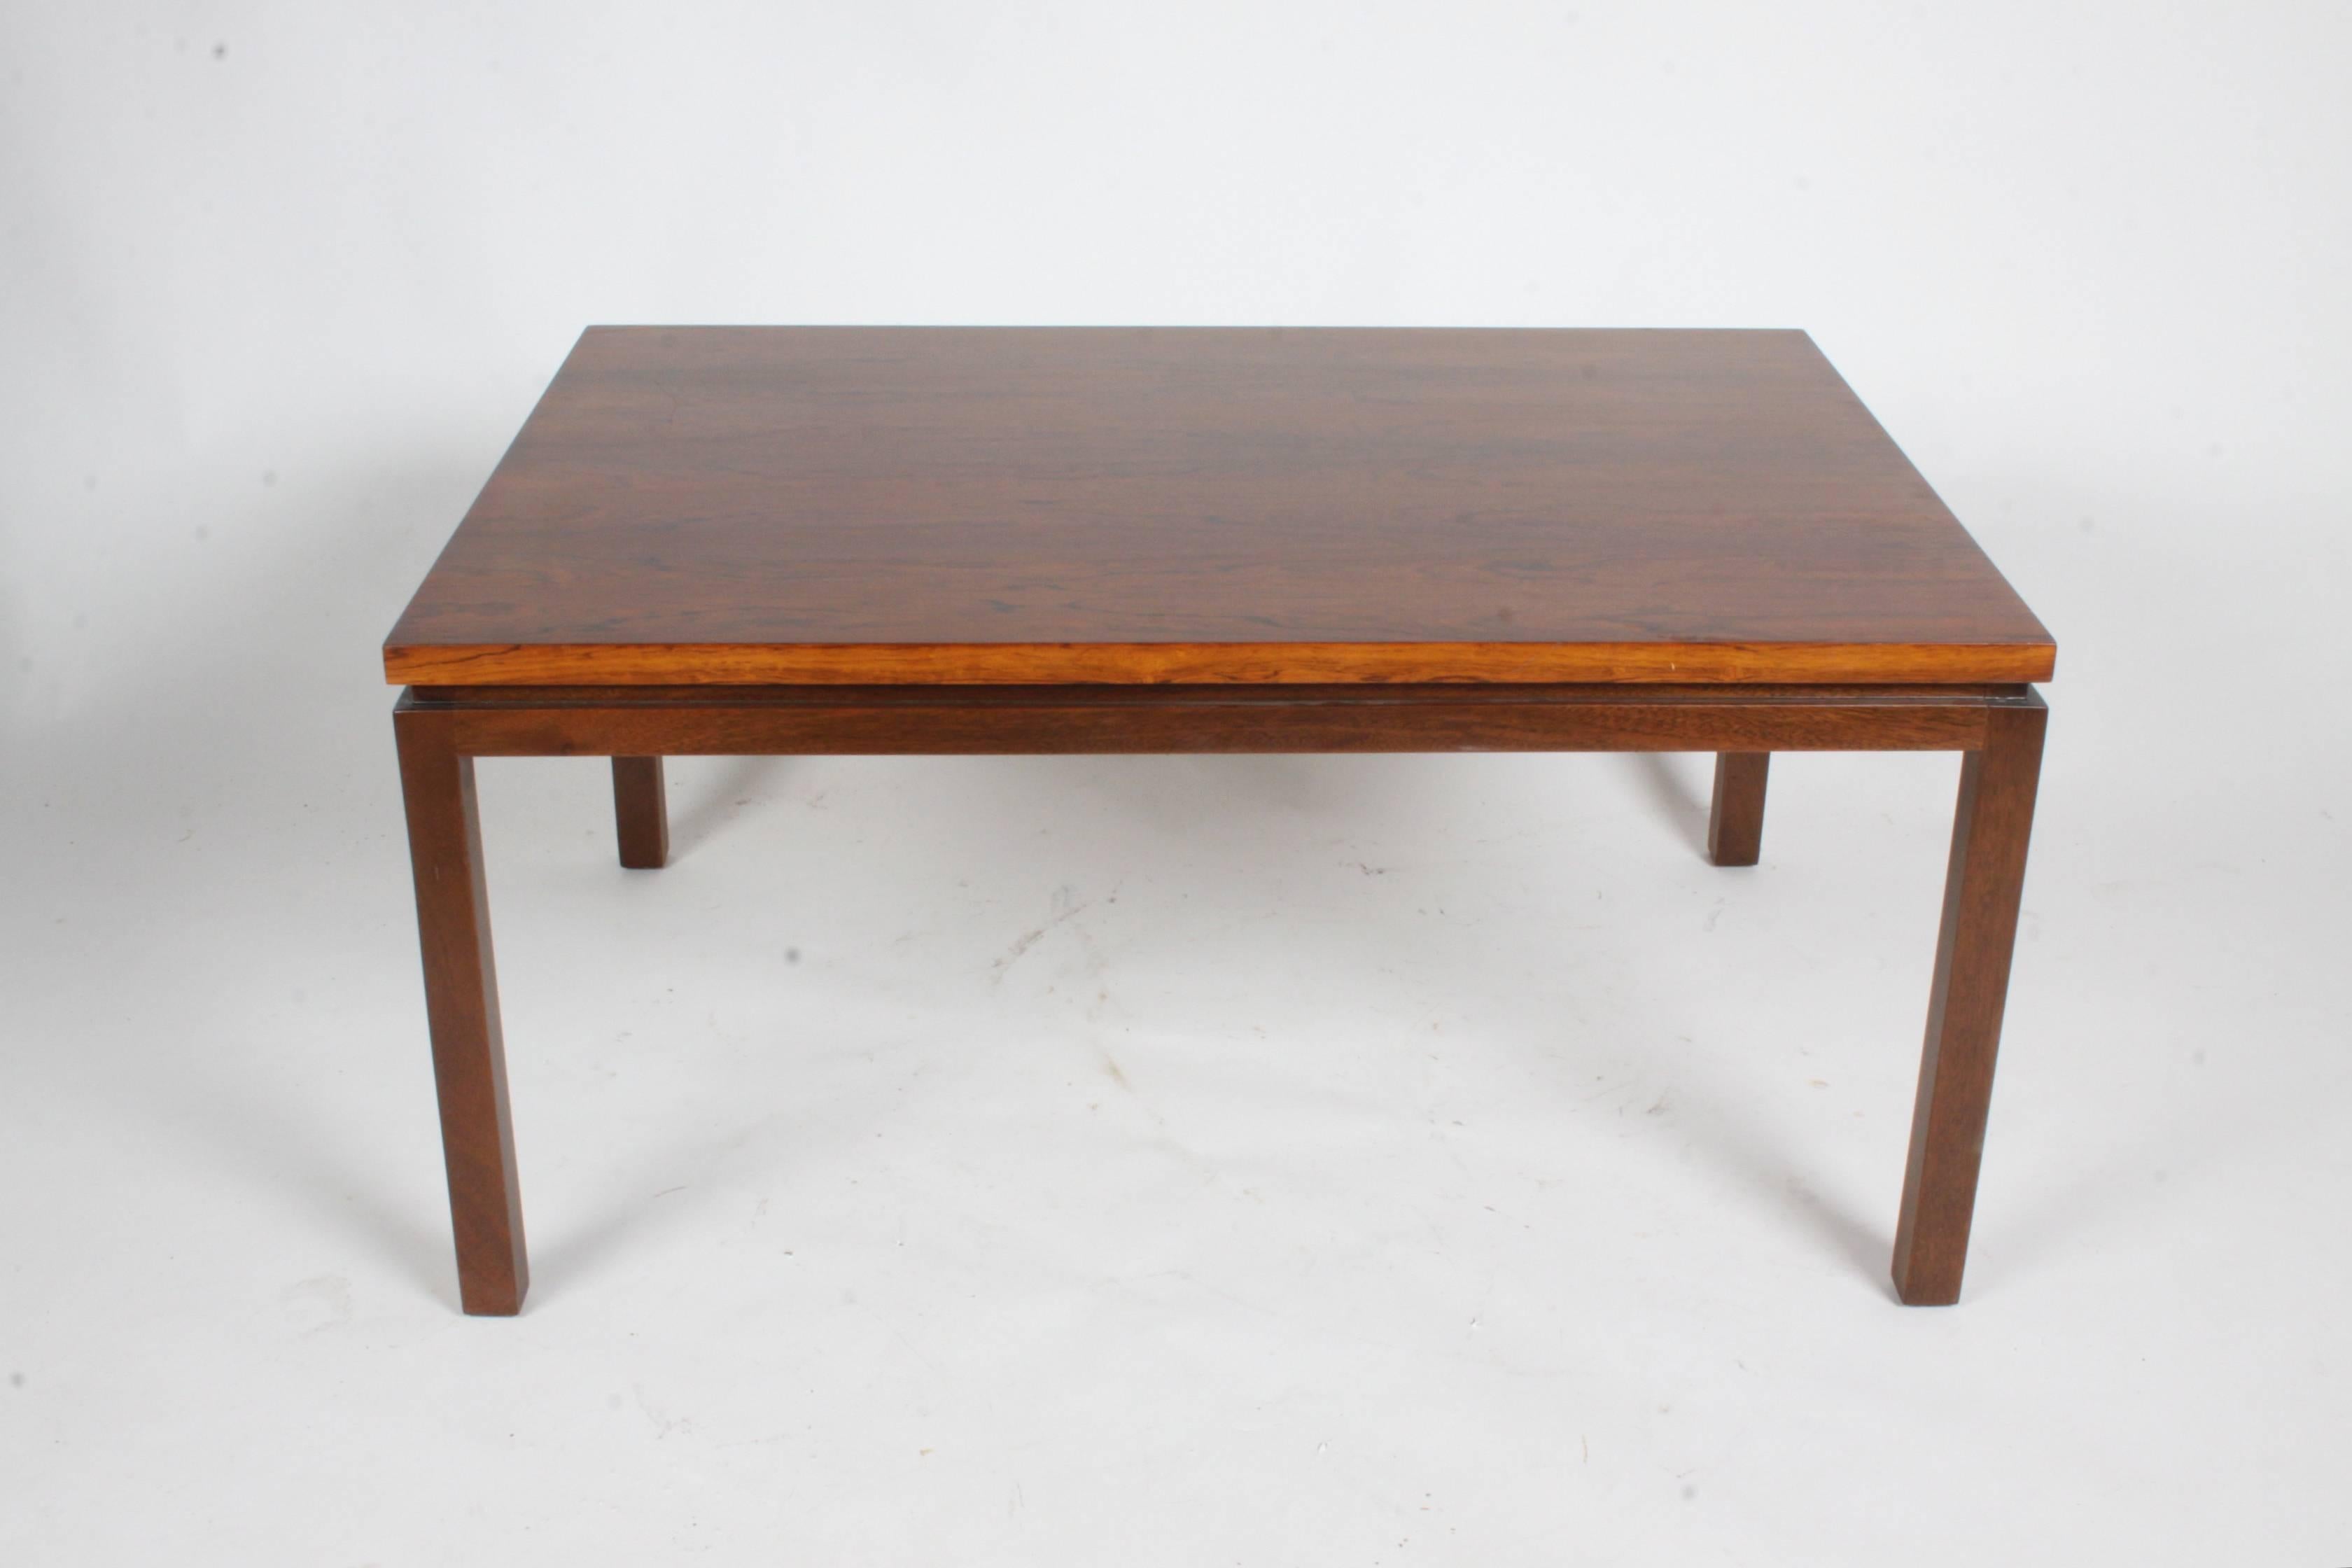 Harvey Probber Rosewood Top & Mahogany Legs Rectangular Parson Coffee Table For Sale 1